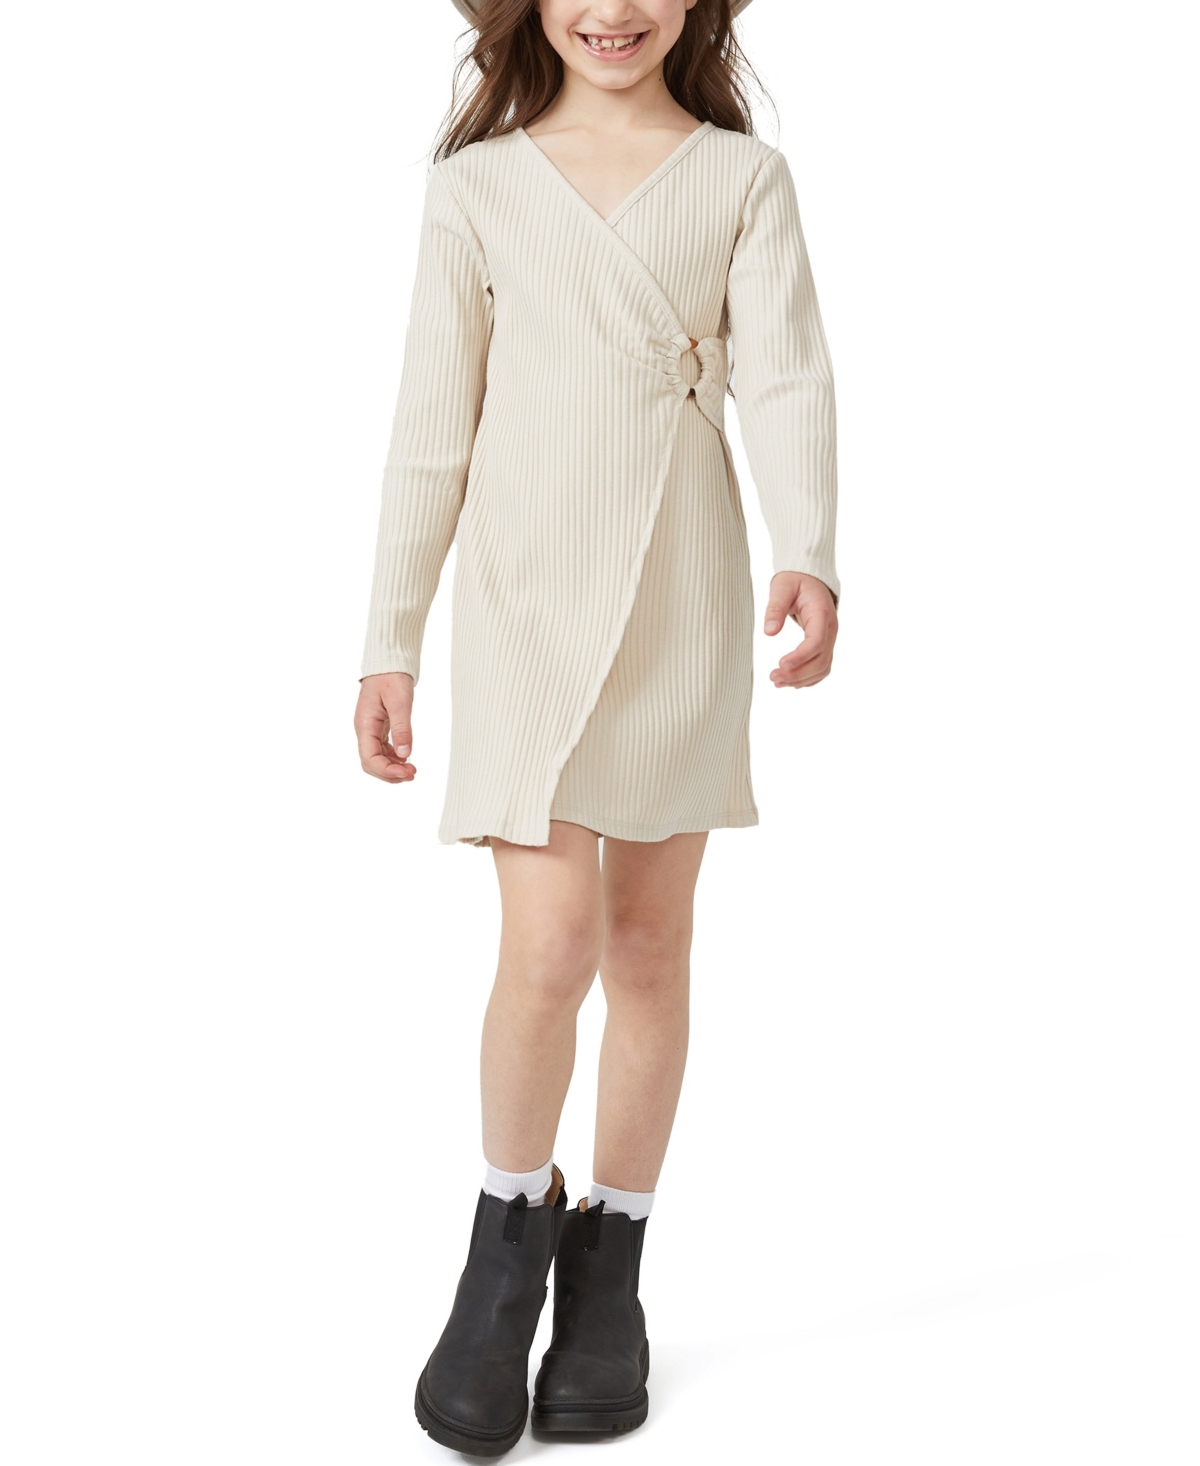 Cotton On Toddler Girls Alexis Long Sleeve Dress In Rainy Day